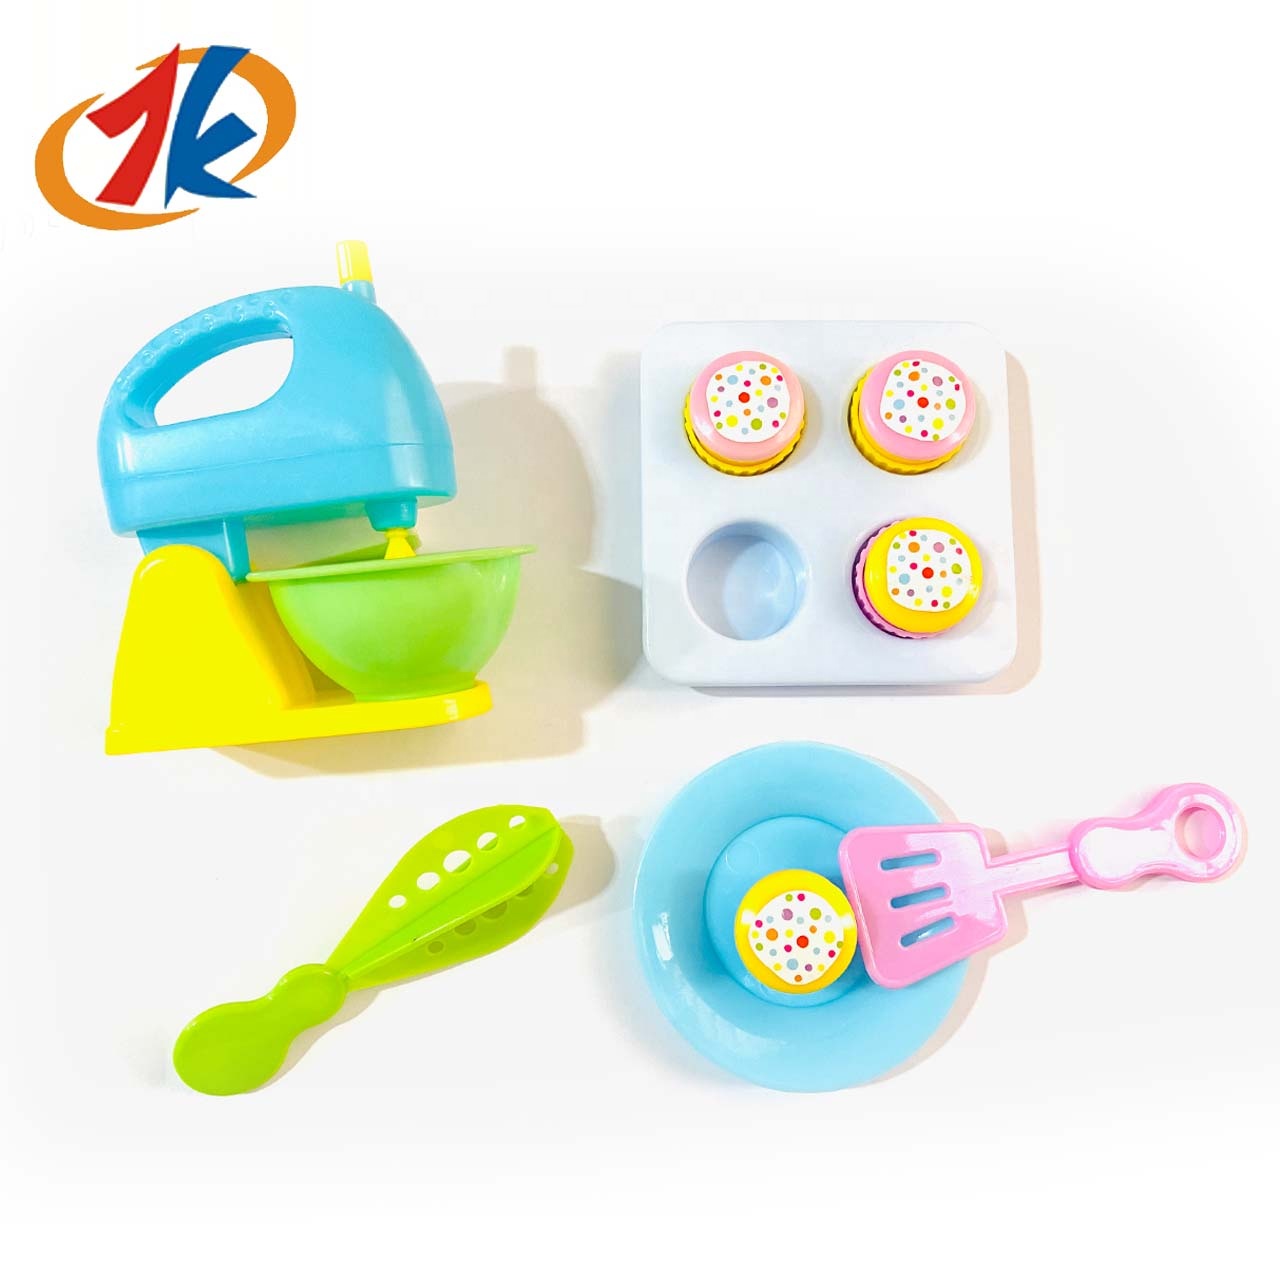 Sedex 4p Toy Factory Funny Plastic Birthday Cake Toys DIY Housing Toys for Kids Promotion